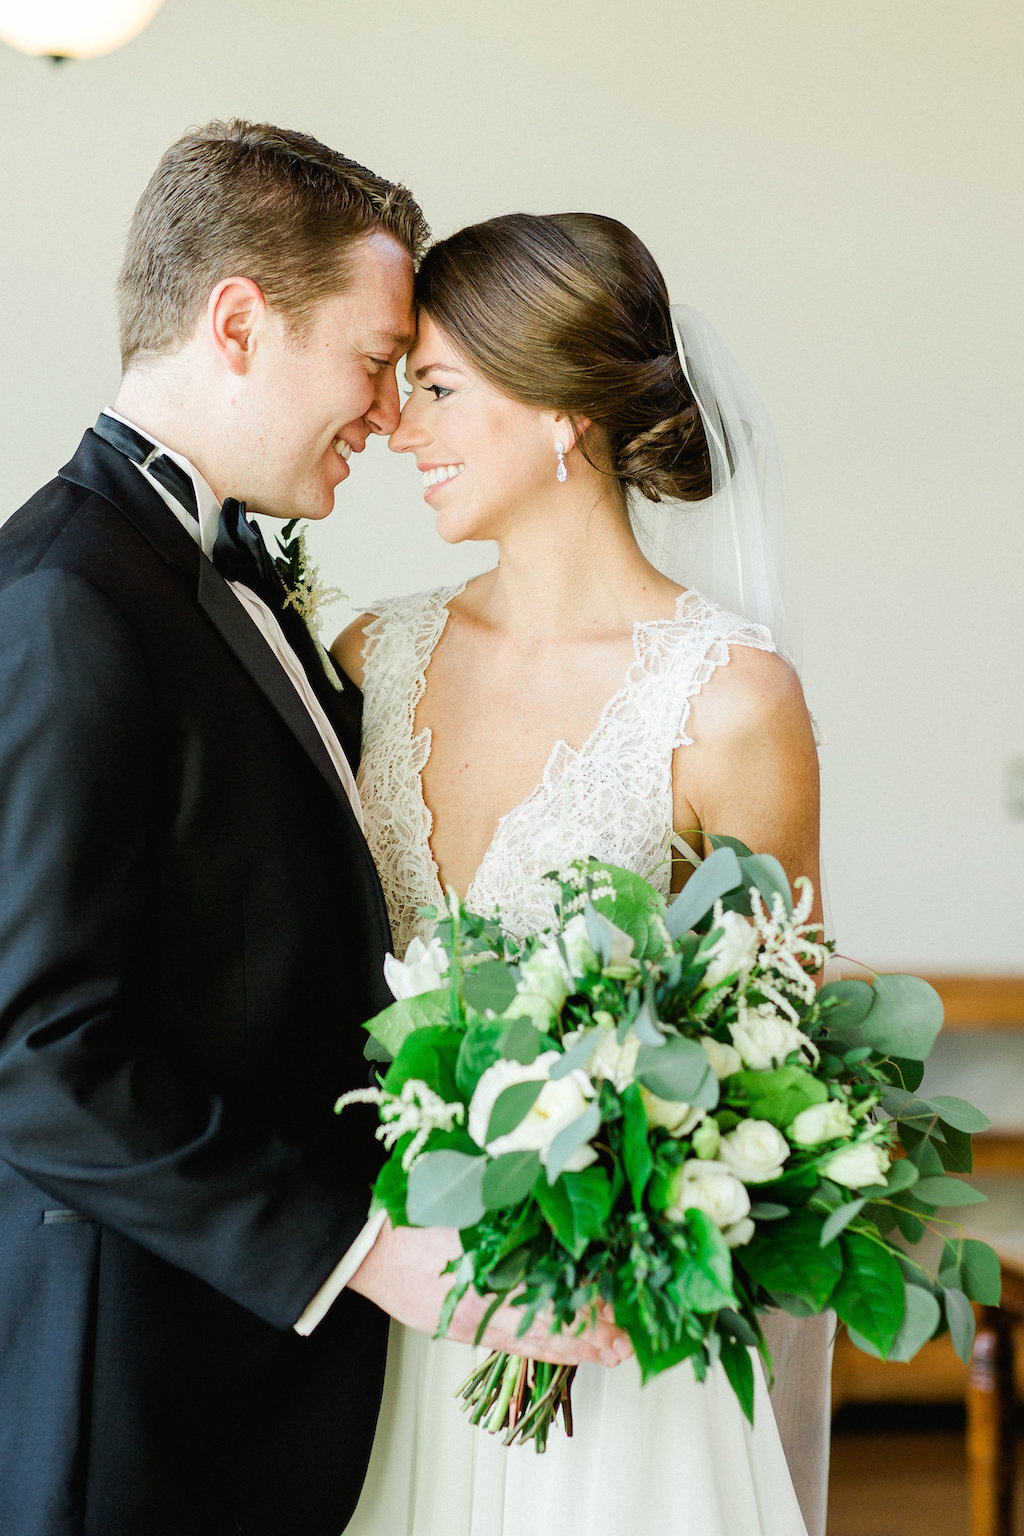 Indoor First Look Portrait, Bride in Lace V Neck Hayley Paige Dress, Groom in Black Tuxedo, with White Floral and Greenery Bouquet | Tampa Bay Wedding Photographer Ailyn La Torre Photography | Bridal Hair and Makeup Femme Akoi Beauty Studio